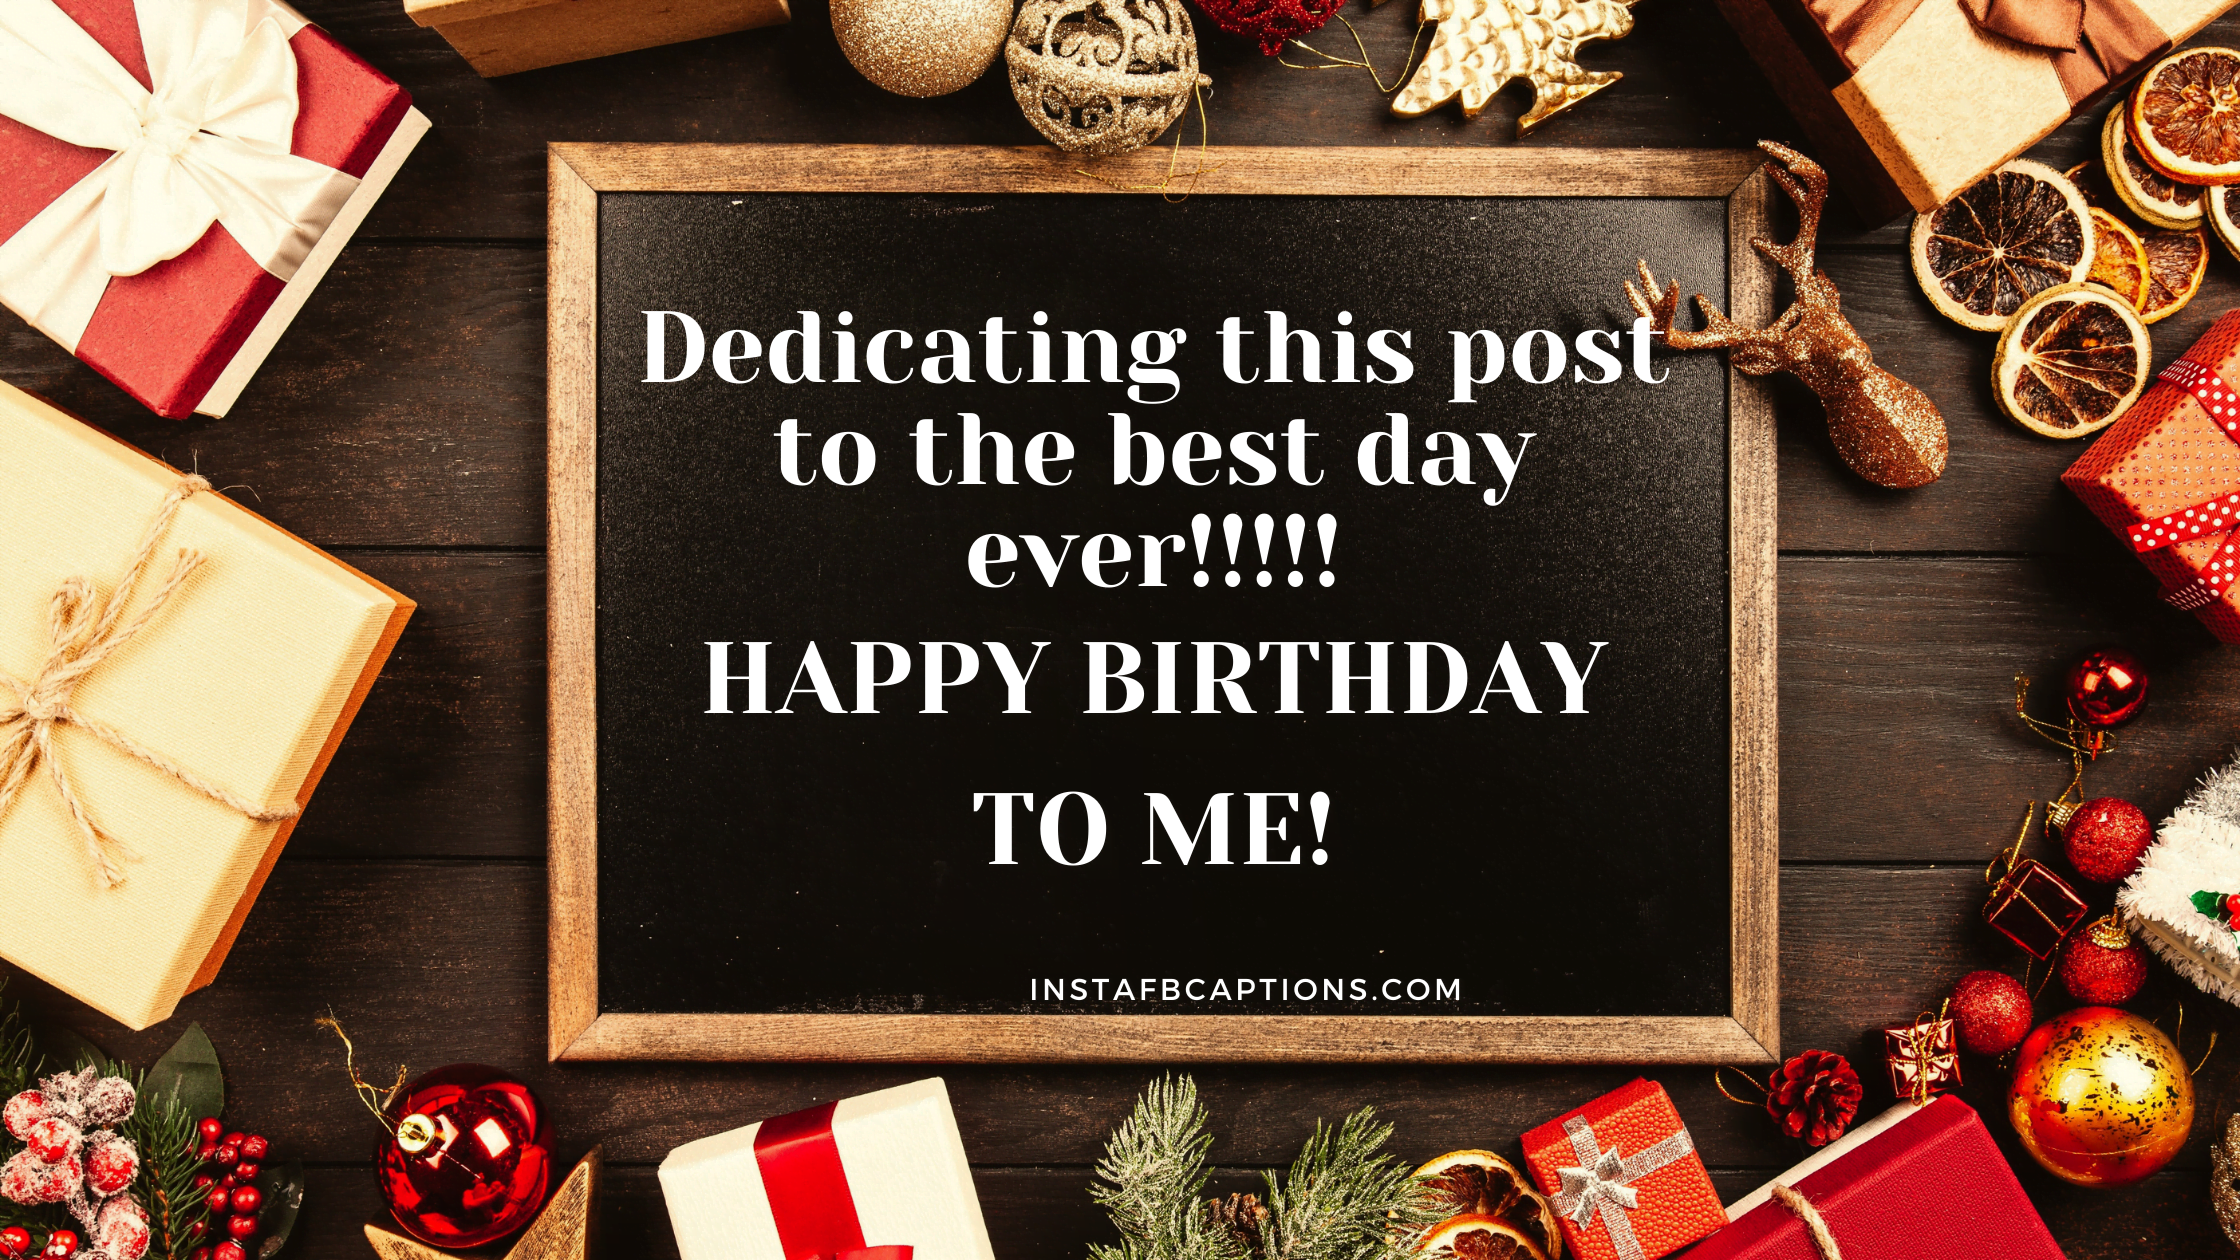 Best Quotes To Accompany Birthday Photo Dum  - Best Quotes To Accompany Birthday Photo Dump - Different Captions for Multiple Photos on Instagram 2022